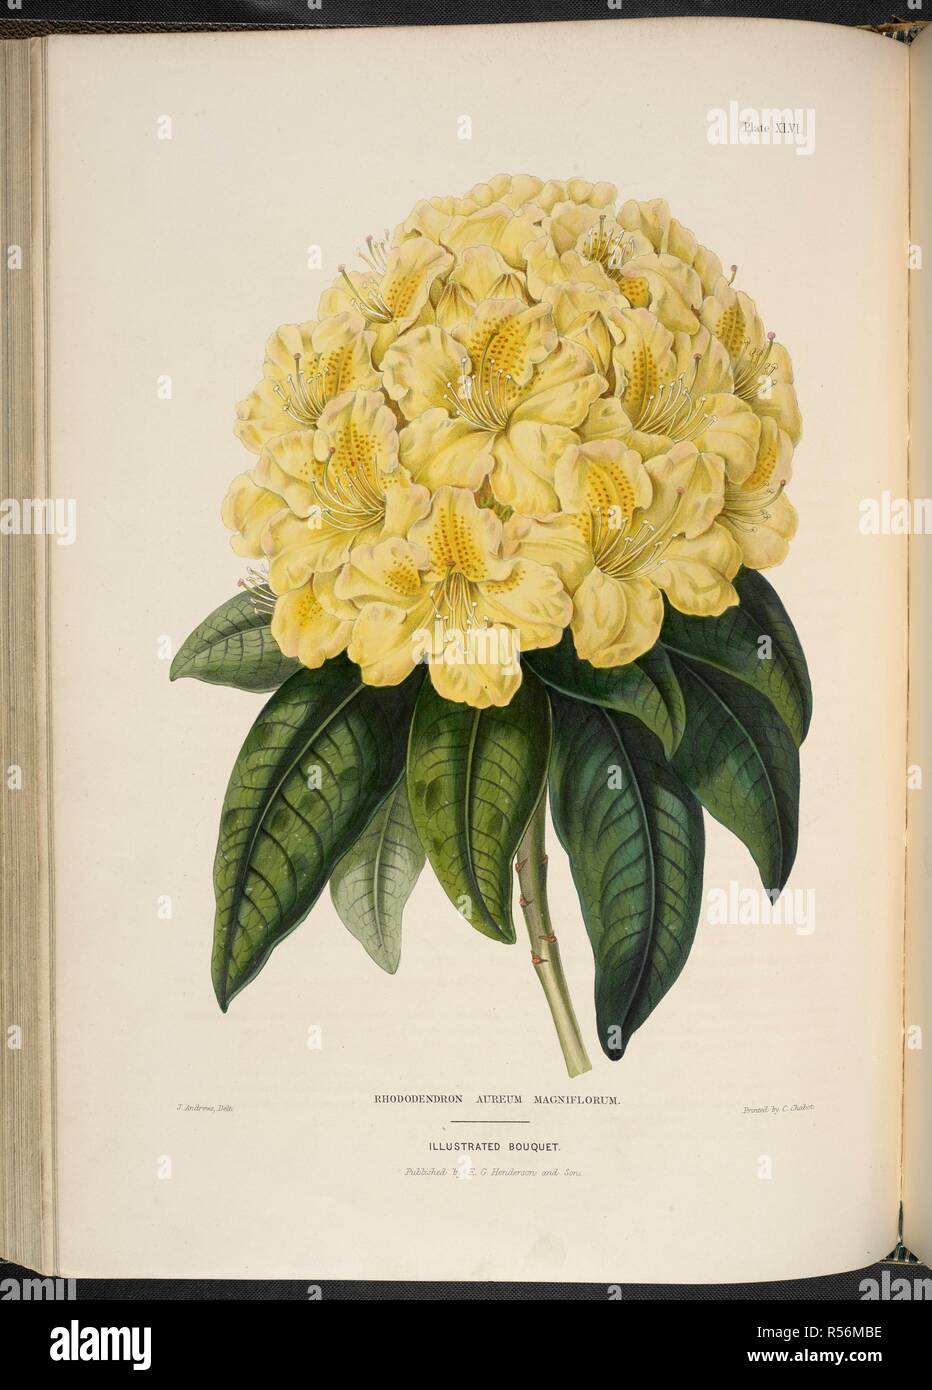 Rhododendron aureum magniflorum. . The Illustrated Bouquet, consisting of figures, with descriptions of new flowers. London, 1857-64. Source: 1823.c.13 plate 46. Author: Henderson, Edward George. Andrews, J. Stock Photo